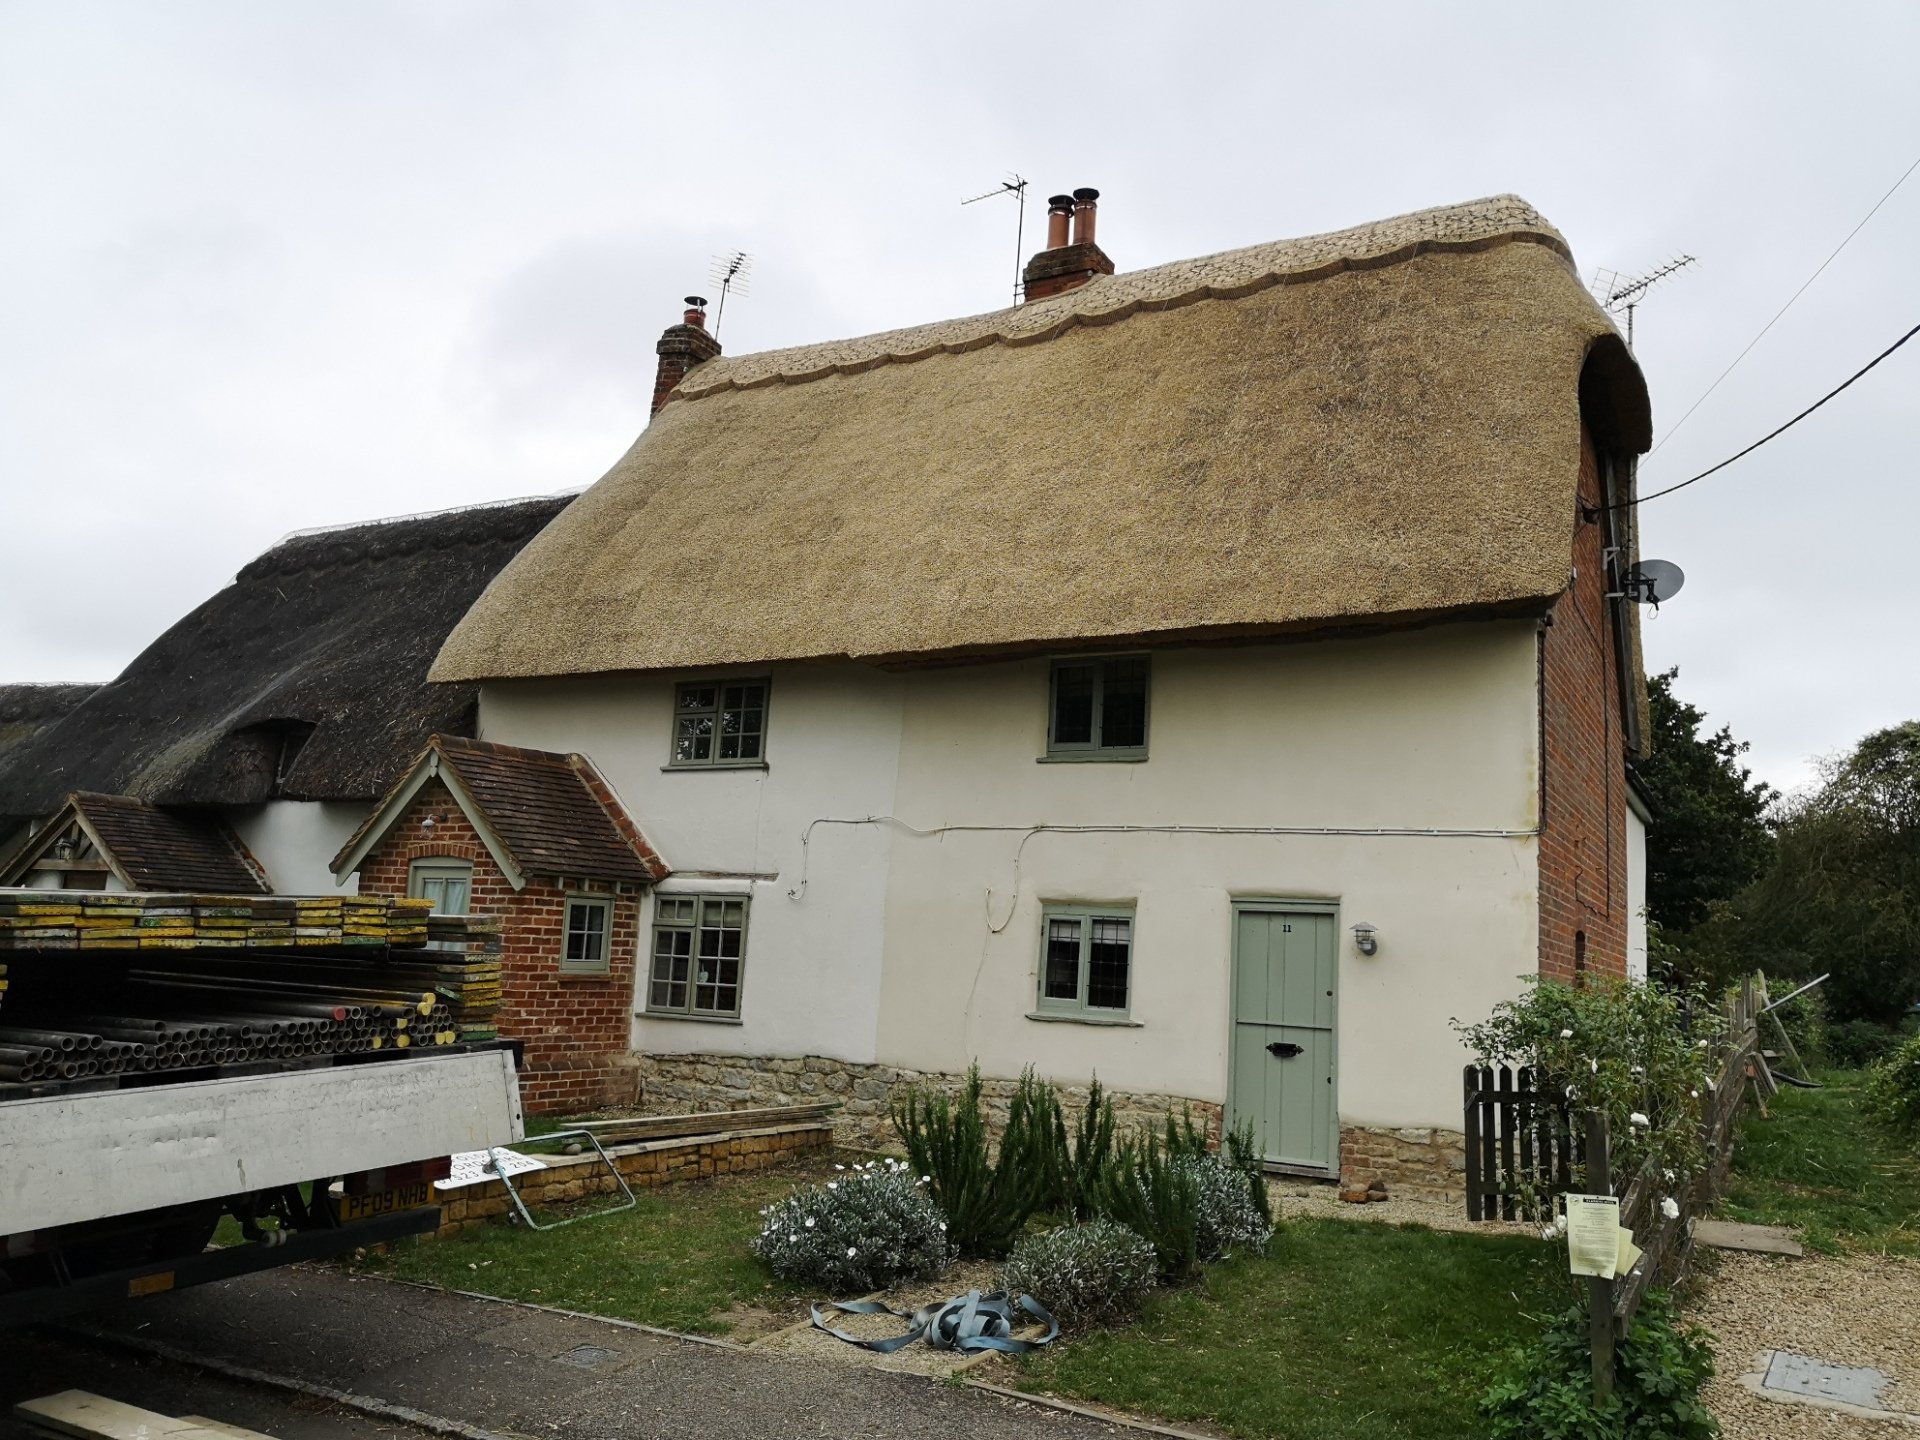 Thame Thatch Chapel Road in Ford